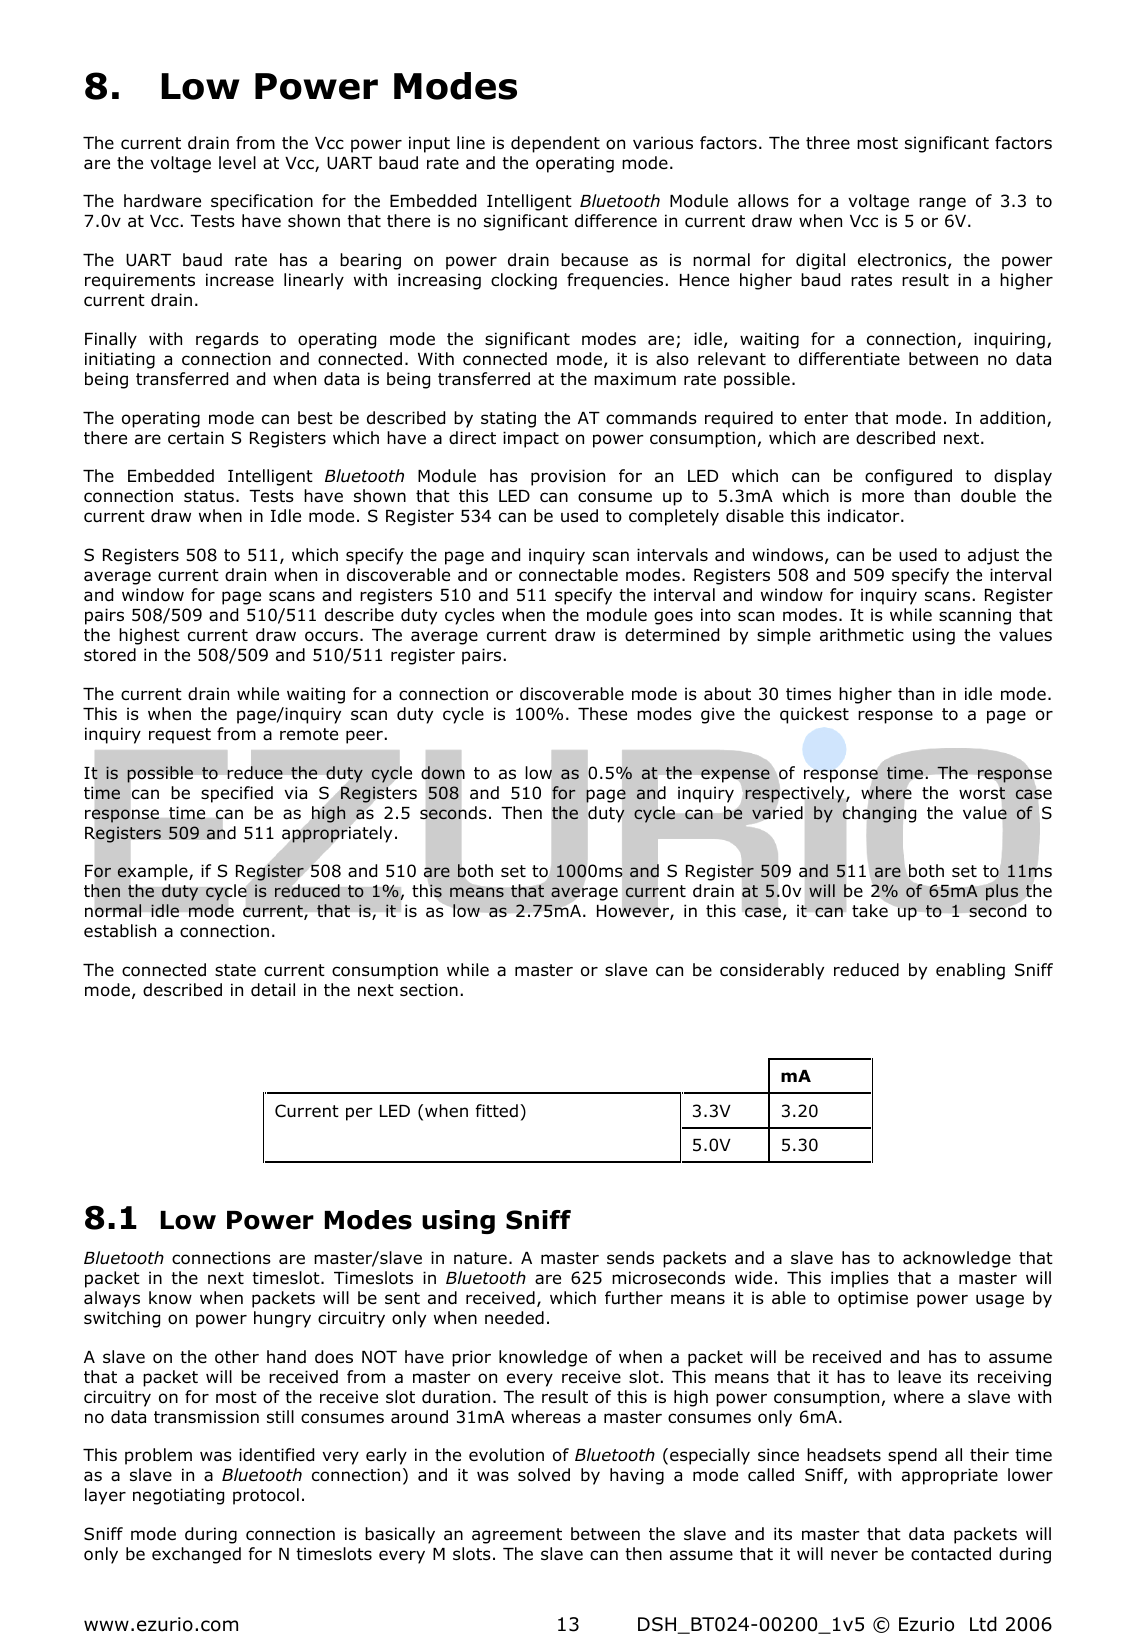  www.ezurio.com  DSH_BT024-00200_1v5 © Ezurio  Ltd 2006 13 8. Low Power Modes The current drain from the Vcc power input line is dependent on various factors. The three most significant factors are the voltage level at Vcc, UART baud rate and the operating mode. The  hardware  specification  for  the Embedded  Intelligent  Bluetooth  Module  allows  for  a  voltage  range  of  3.3  to 7.0v at Vcc. Tests have shown that there is no significant difference in current draw when Vcc is 5 or 6V.  The  UART  baud  rate  has  a  bearing  on  power  drain  because  as  is  normal  for  digital  electronics,  the  power requirements  increase  linearly  with  increasing  clocking  frequencies.  Hence  higher  baud  rates  result  in  a  higher current drain. Finally  with  regards  to  operating  mode  the  significant  modes  are;  idle,  waiting  for  a  connection,  inquiring, initiating a connection and connected. With connected mode, it is also  relevant to  differentiate between no  data being transferred and when data is being transferred at the maximum rate possible. The operating mode can best be described by stating the AT commands required to enter that mode. In addition, there are certain S Registers which have a direct impact on power consumption, which are described next. The  Embedded  Intelligent  Bluetooth  Module  has  provision  for  an  LED  which  can  be  configured  to  display connection  status.  Tests  have  shown  that  this  LED  can  consume  up  to  5.3mA  which  is  more  than  double  the current draw when in Idle mode. S Register 534 can be used to completely disable this indicator. S Registers 508 to 511, which specify the page and inquiry scan intervals and windows, can be used to adjust the average current drain when in discoverable and or connectable modes. Registers 508 and 509 specify the interval and window for page scans and registers 510 and 511 specify the interval and window for inquiry scans. Register pairs 508/509 and 510/511 describe duty cycles when the module goes into scan modes. It is while scanning that the highest current draw occurs. The  average  current draw is  determined  by simple  arithmetic using the values stored in the 508/509 and 510/511 register pairs. The current drain while waiting for a connection or discoverable mode is about 30 times higher than in idle mode. This  is  when  the  page/inquiry  scan duty  cycle  is 100%.  These  modes  give  the  quickest  response  to  a  page  or inquiry request from a remote peer. It is  possible to reduce  the duty  cycle  down to  as low  as  0.5% at  the  expense  of  response time. The  response time  can  be  specified  via  S  Registers  508  and  510  for  page  and  inquiry  respectively,  where  the  worst  case response  time  can  be  as  high  as  2.5  seconds.  Then  the  duty  cycle  can  be  varied  by  changing  the  value  of  S Registers 509 and 511 appropriately. For example, if S Register 508 and 510 are both set to 1000ms and S Register 509 and 511 are both set to 11ms then the duty cycle is reduced to 1%, this means that average current drain at 5.0v will be 2% of 65mA plus the normal idle mode  current, that is,  it  is as  low as  2.75mA. However,  in this  case, it  can take  up  to 1  second to establish a connection. The connected state current consumption while a master or slave can be considerably reduced by  enabling Sniff mode, described in detail in the next section.     8.1 Low Power Modes using Sniff Bluetooth connections are  master/slave in nature. A master sends packets and a slave has  to  acknowledge that packet  in  the  next  timeslot.  Timeslots  in  Bluetooth  are  625  microseconds  wide.  This  implies  that  a  master  will always know when packets will be sent and received, which further means it is able to optimise power usage by switching on power hungry circuitry only when needed. A slave on the other hand does NOT have prior knowledge of when a packet will be received and has to assume that a packet will be received  from a master  on every  receive slot. This means that it has to  leave its receiving circuitry on for most of the receive slot duration. The result of this is high power consumption, where a slave with no data transmission still consumes around 31mA whereas a master consumes only 6mA. This problem was identified very early in the evolution of Bluetooth (especially since headsets spend all their time as  a slave  in  a  Bluetooth  connection)  and  it  was  solved  by  having  a  mode  called  Sniff,  with  appropriate  lower layer negotiating protocol. Sniff mode during connection is basically an agreement between the slave  and  its master that data packets will only be exchanged for N timeslots every M slots. The slave can then assume that it will never be contacted during     mA 3.3V  3.20 Current per LED (when fitted)  5.0V  5.30 